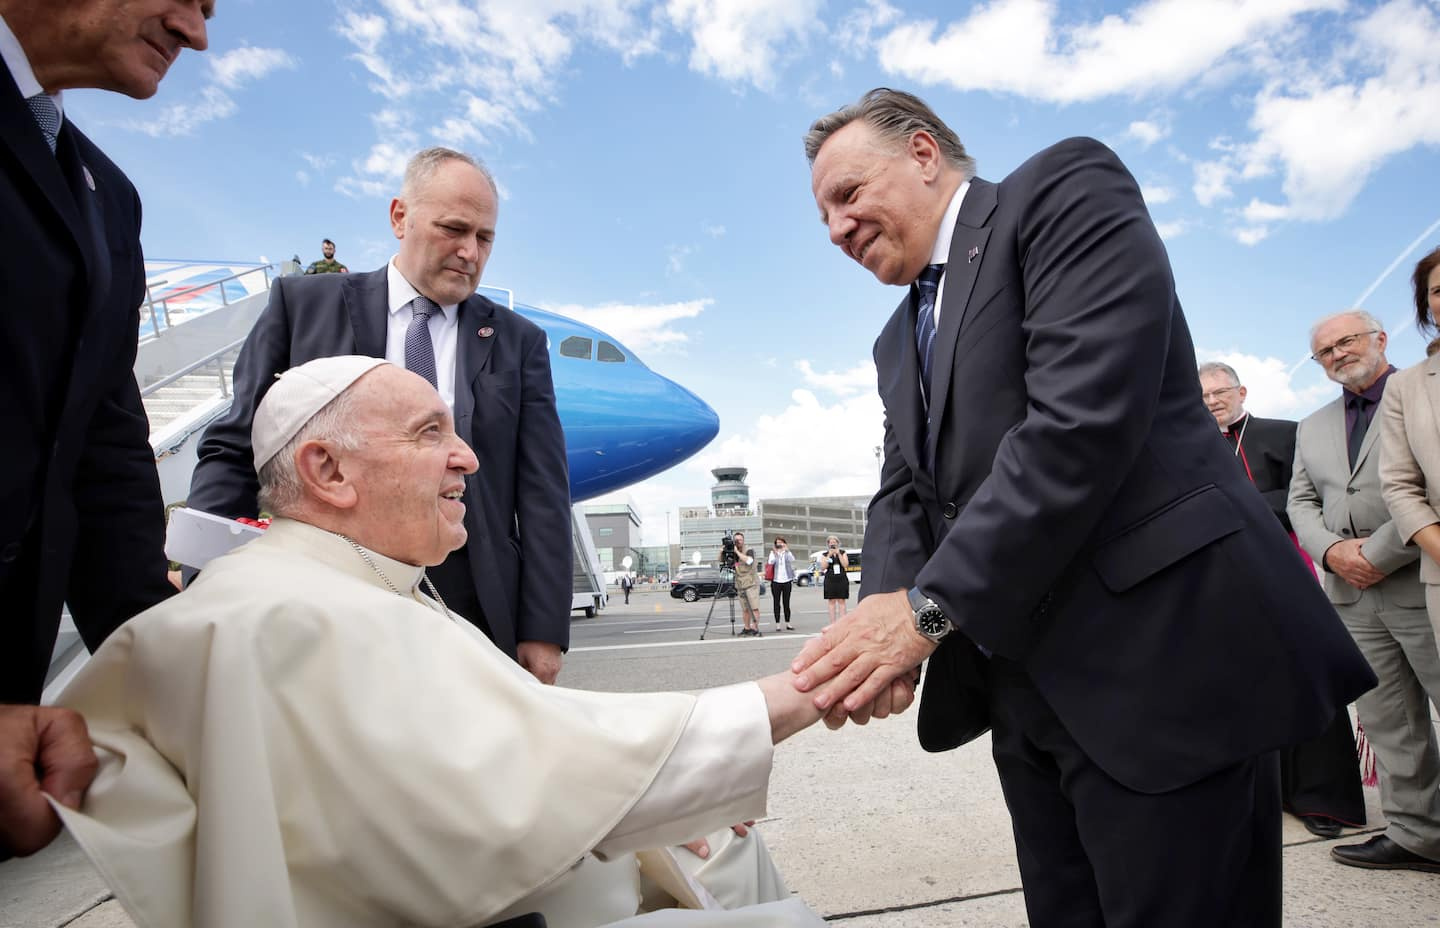 Pope's visit: "We hope it will help reconciliation, healing," says Legault